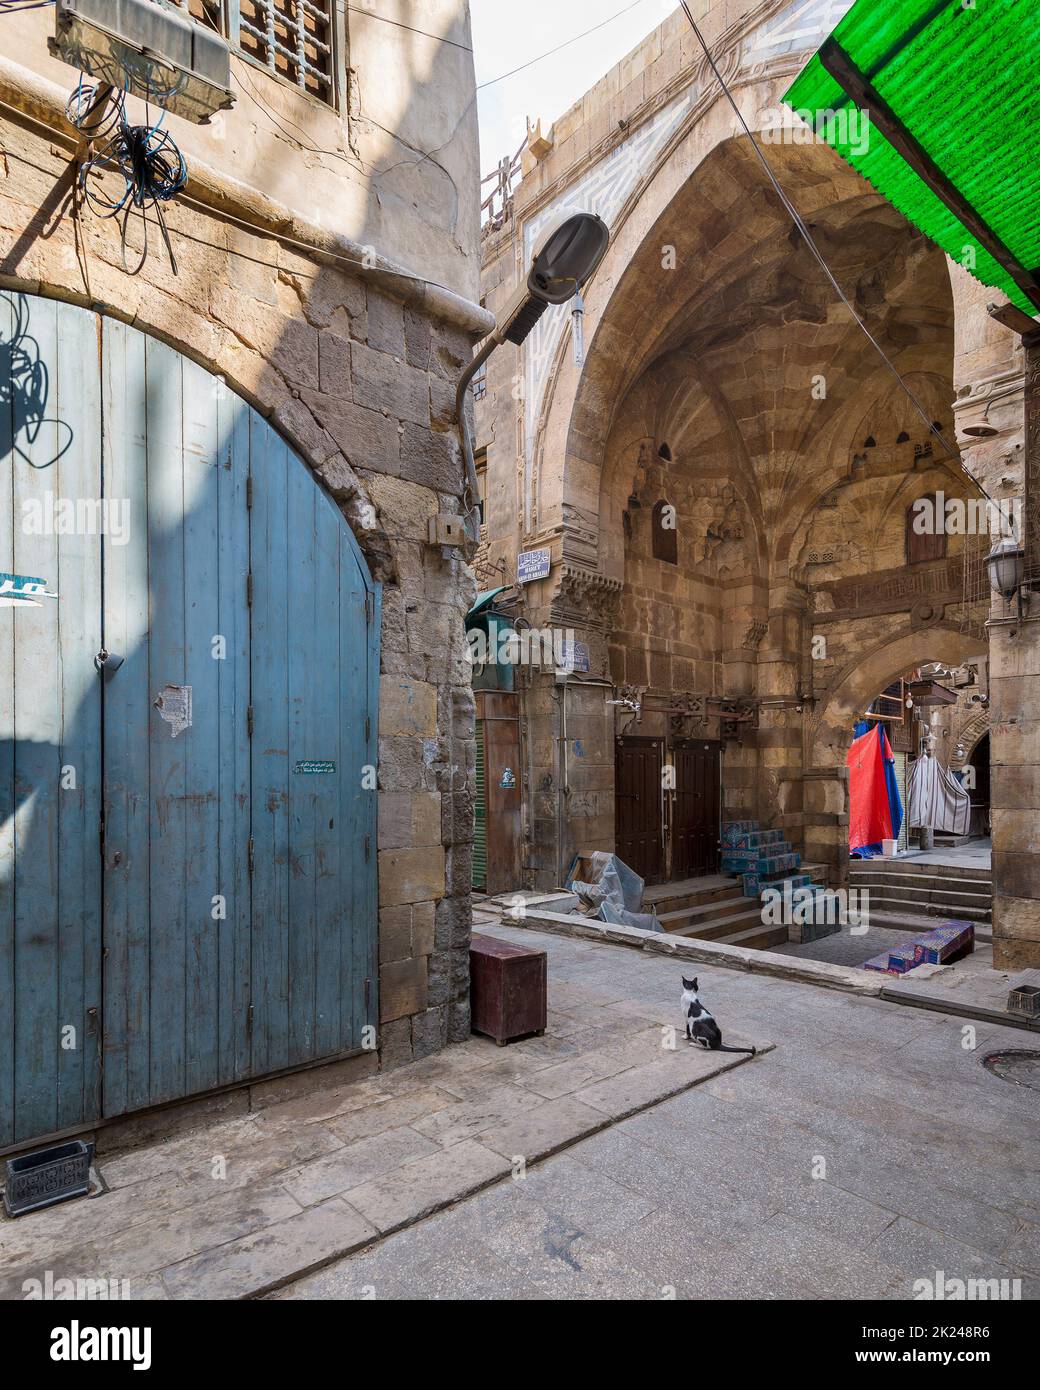 Cairo, Egypt- June 26 2020: Alleys of old historic Mamluk era Khan al-Khalili famous bazaar and souq, with closed shops during Covid-19 lockdown Stock Photo